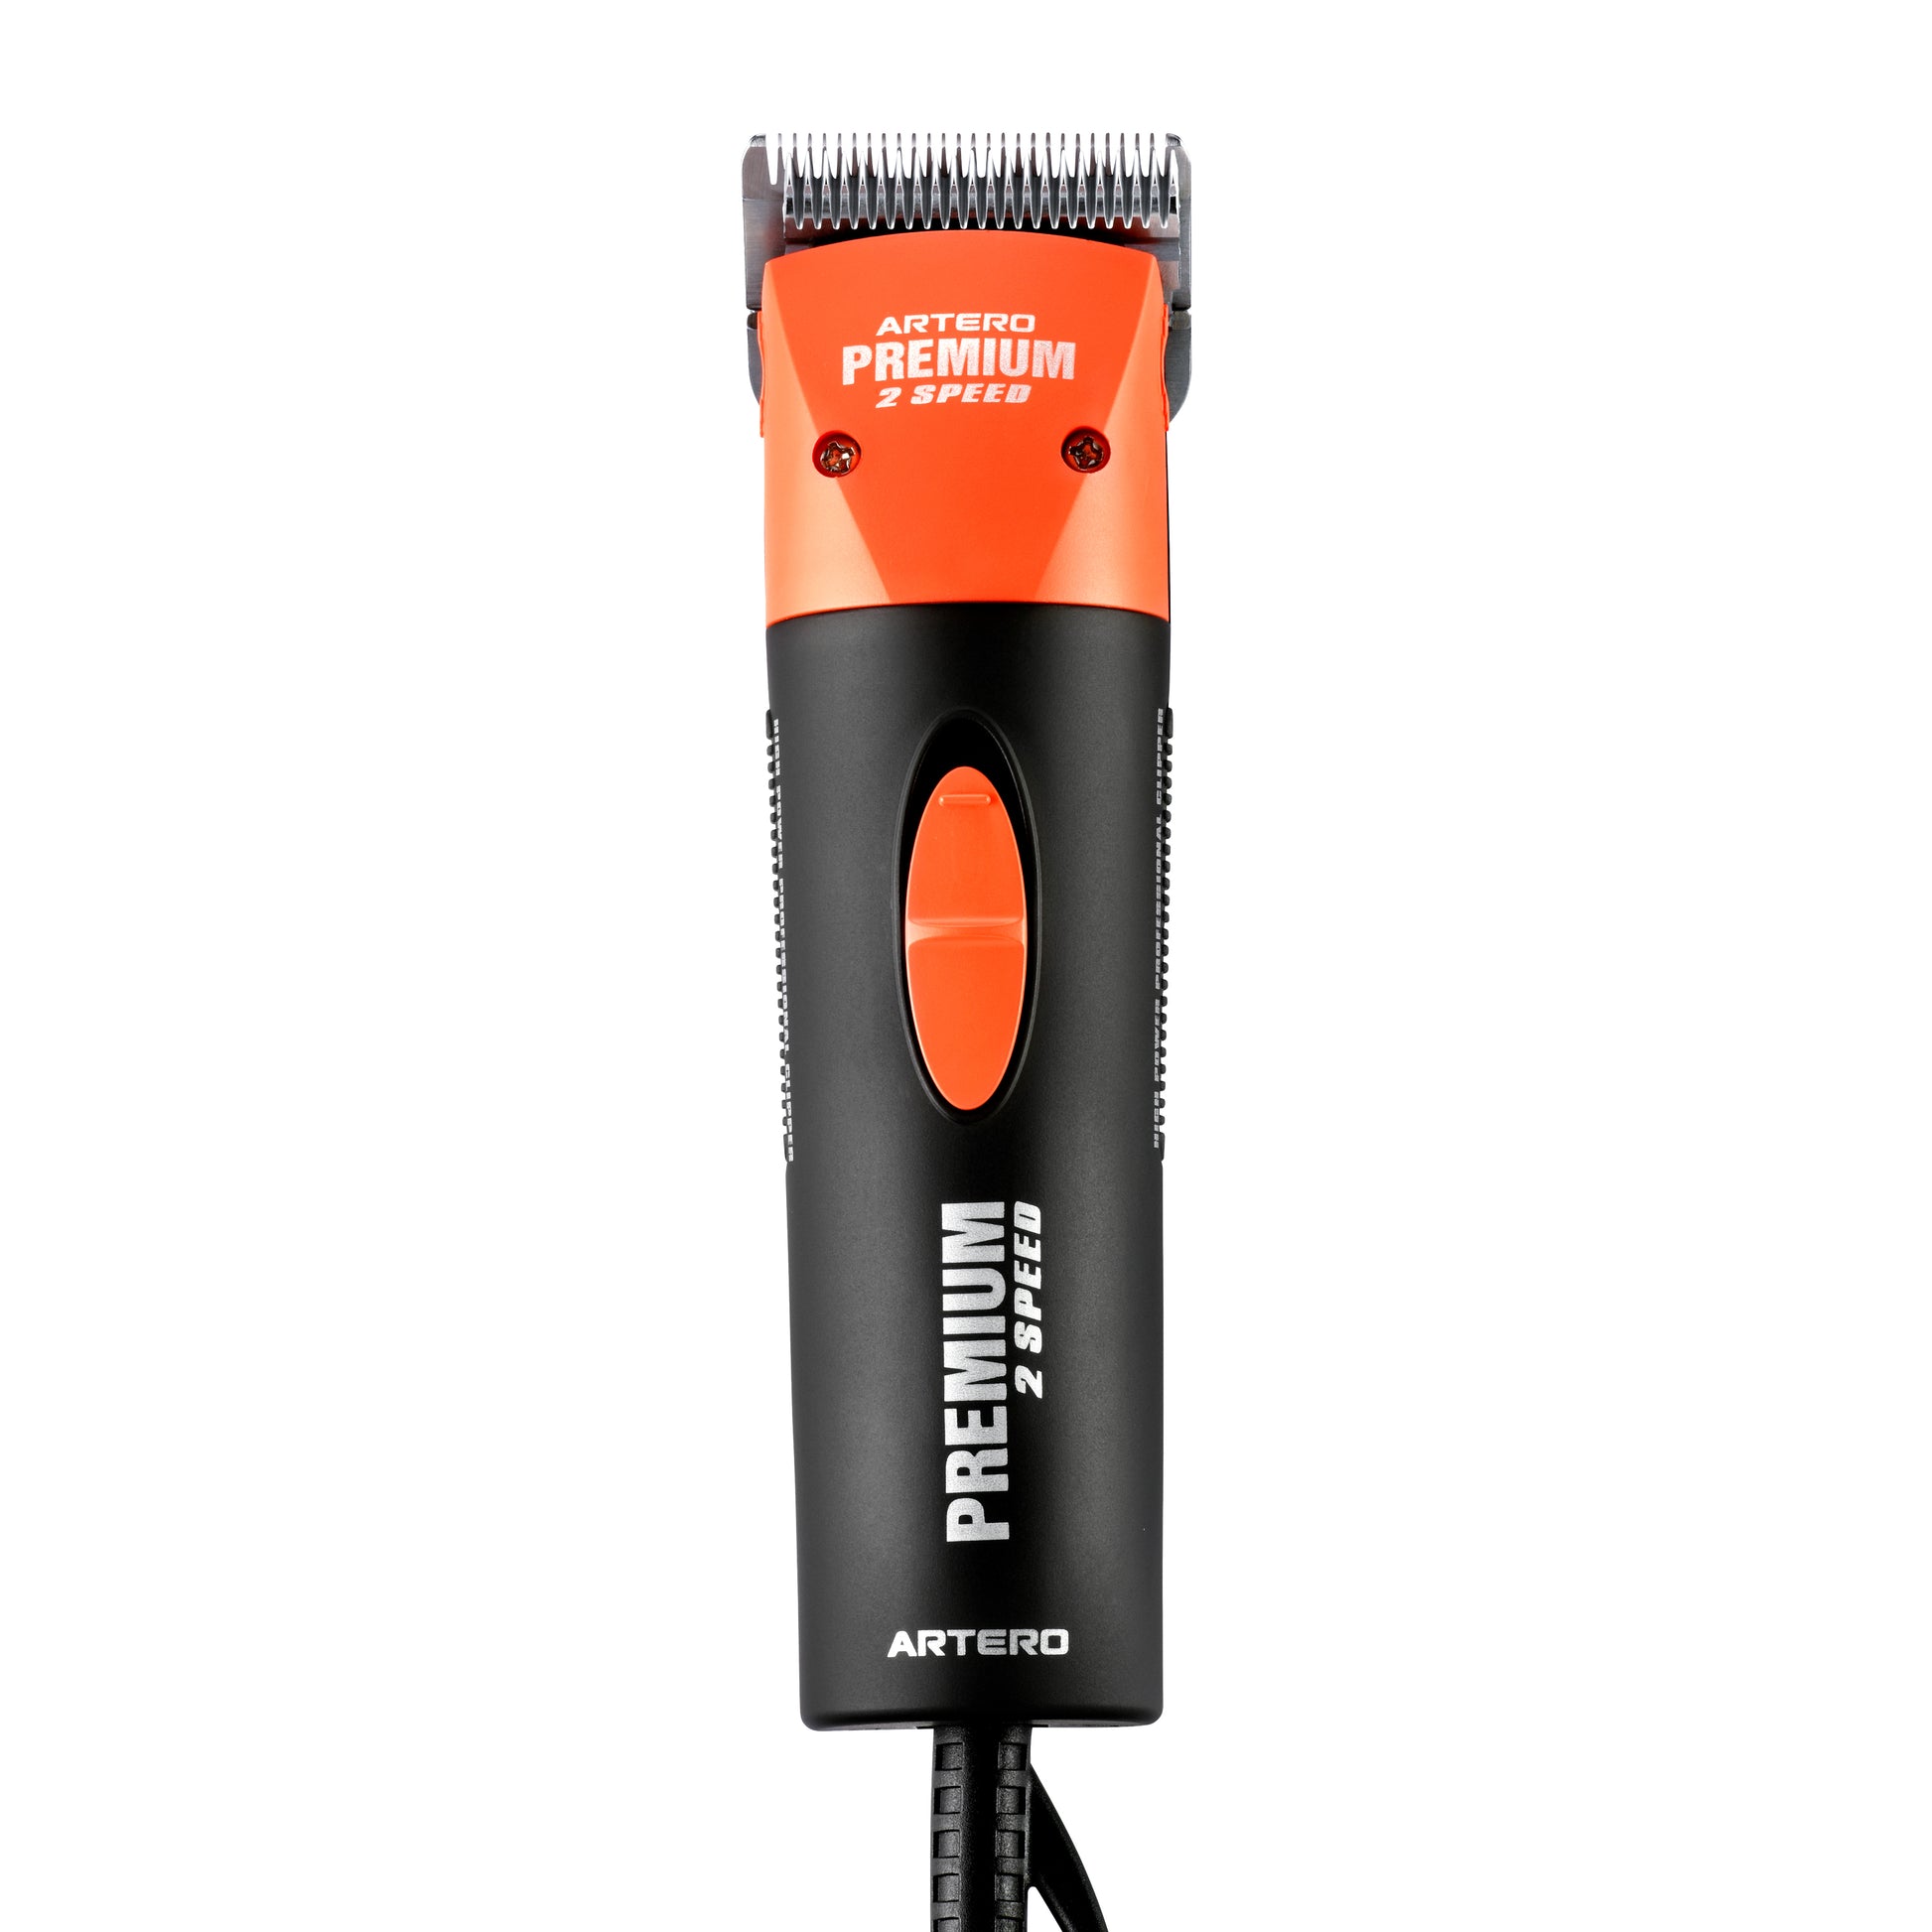 The Artero A5 Premium Professional Pet Grooming Clipper 2 Speed provides reliable, flawless performance. Its two speeds can be switched seamlessly and it's compatible with Andis, Oster, Wahl, Artero, and Geib Blades. This Professional Pet Clipper creates very low noise and vibration and is extremely light weight. Color Orange.